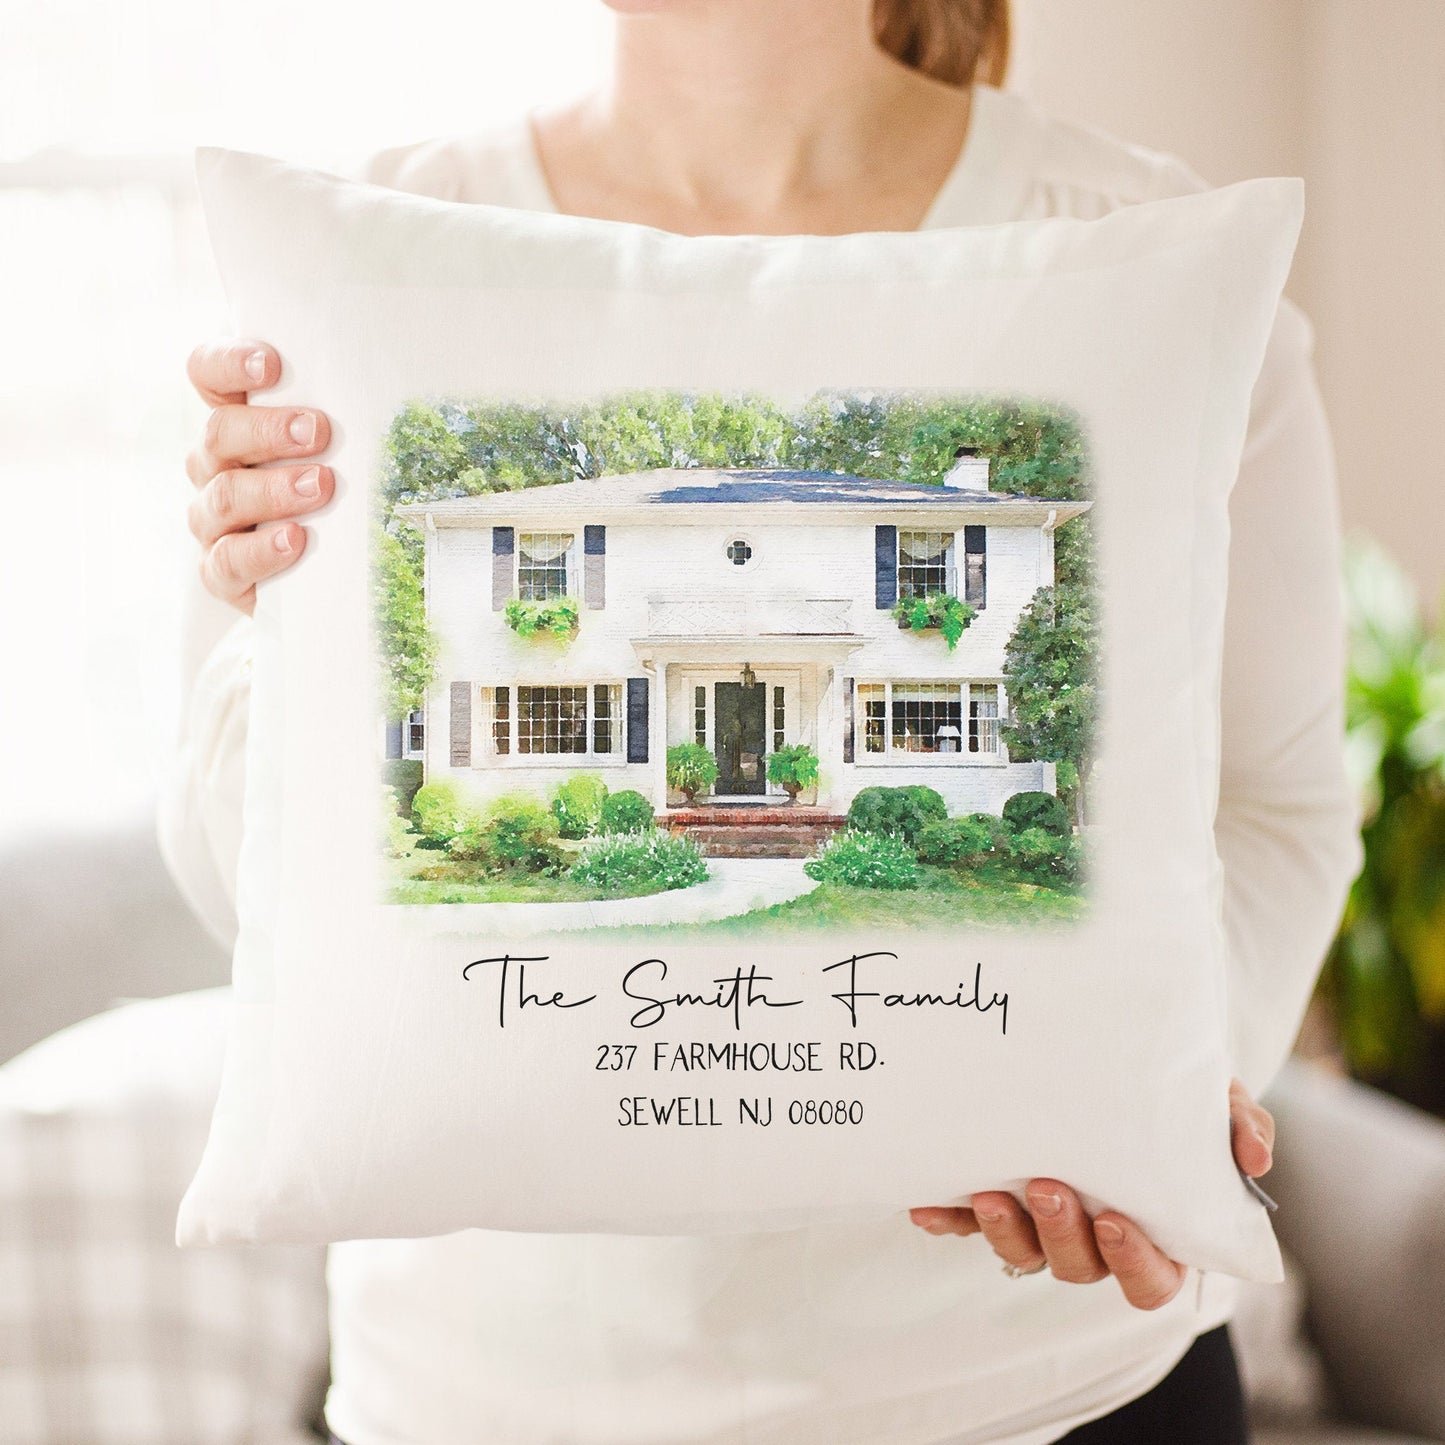 Personalized House Portrait | House Portrait from Photo | Home Portrait | Watercolor House Portrait | First Home Gift | Realtor Closing Gift